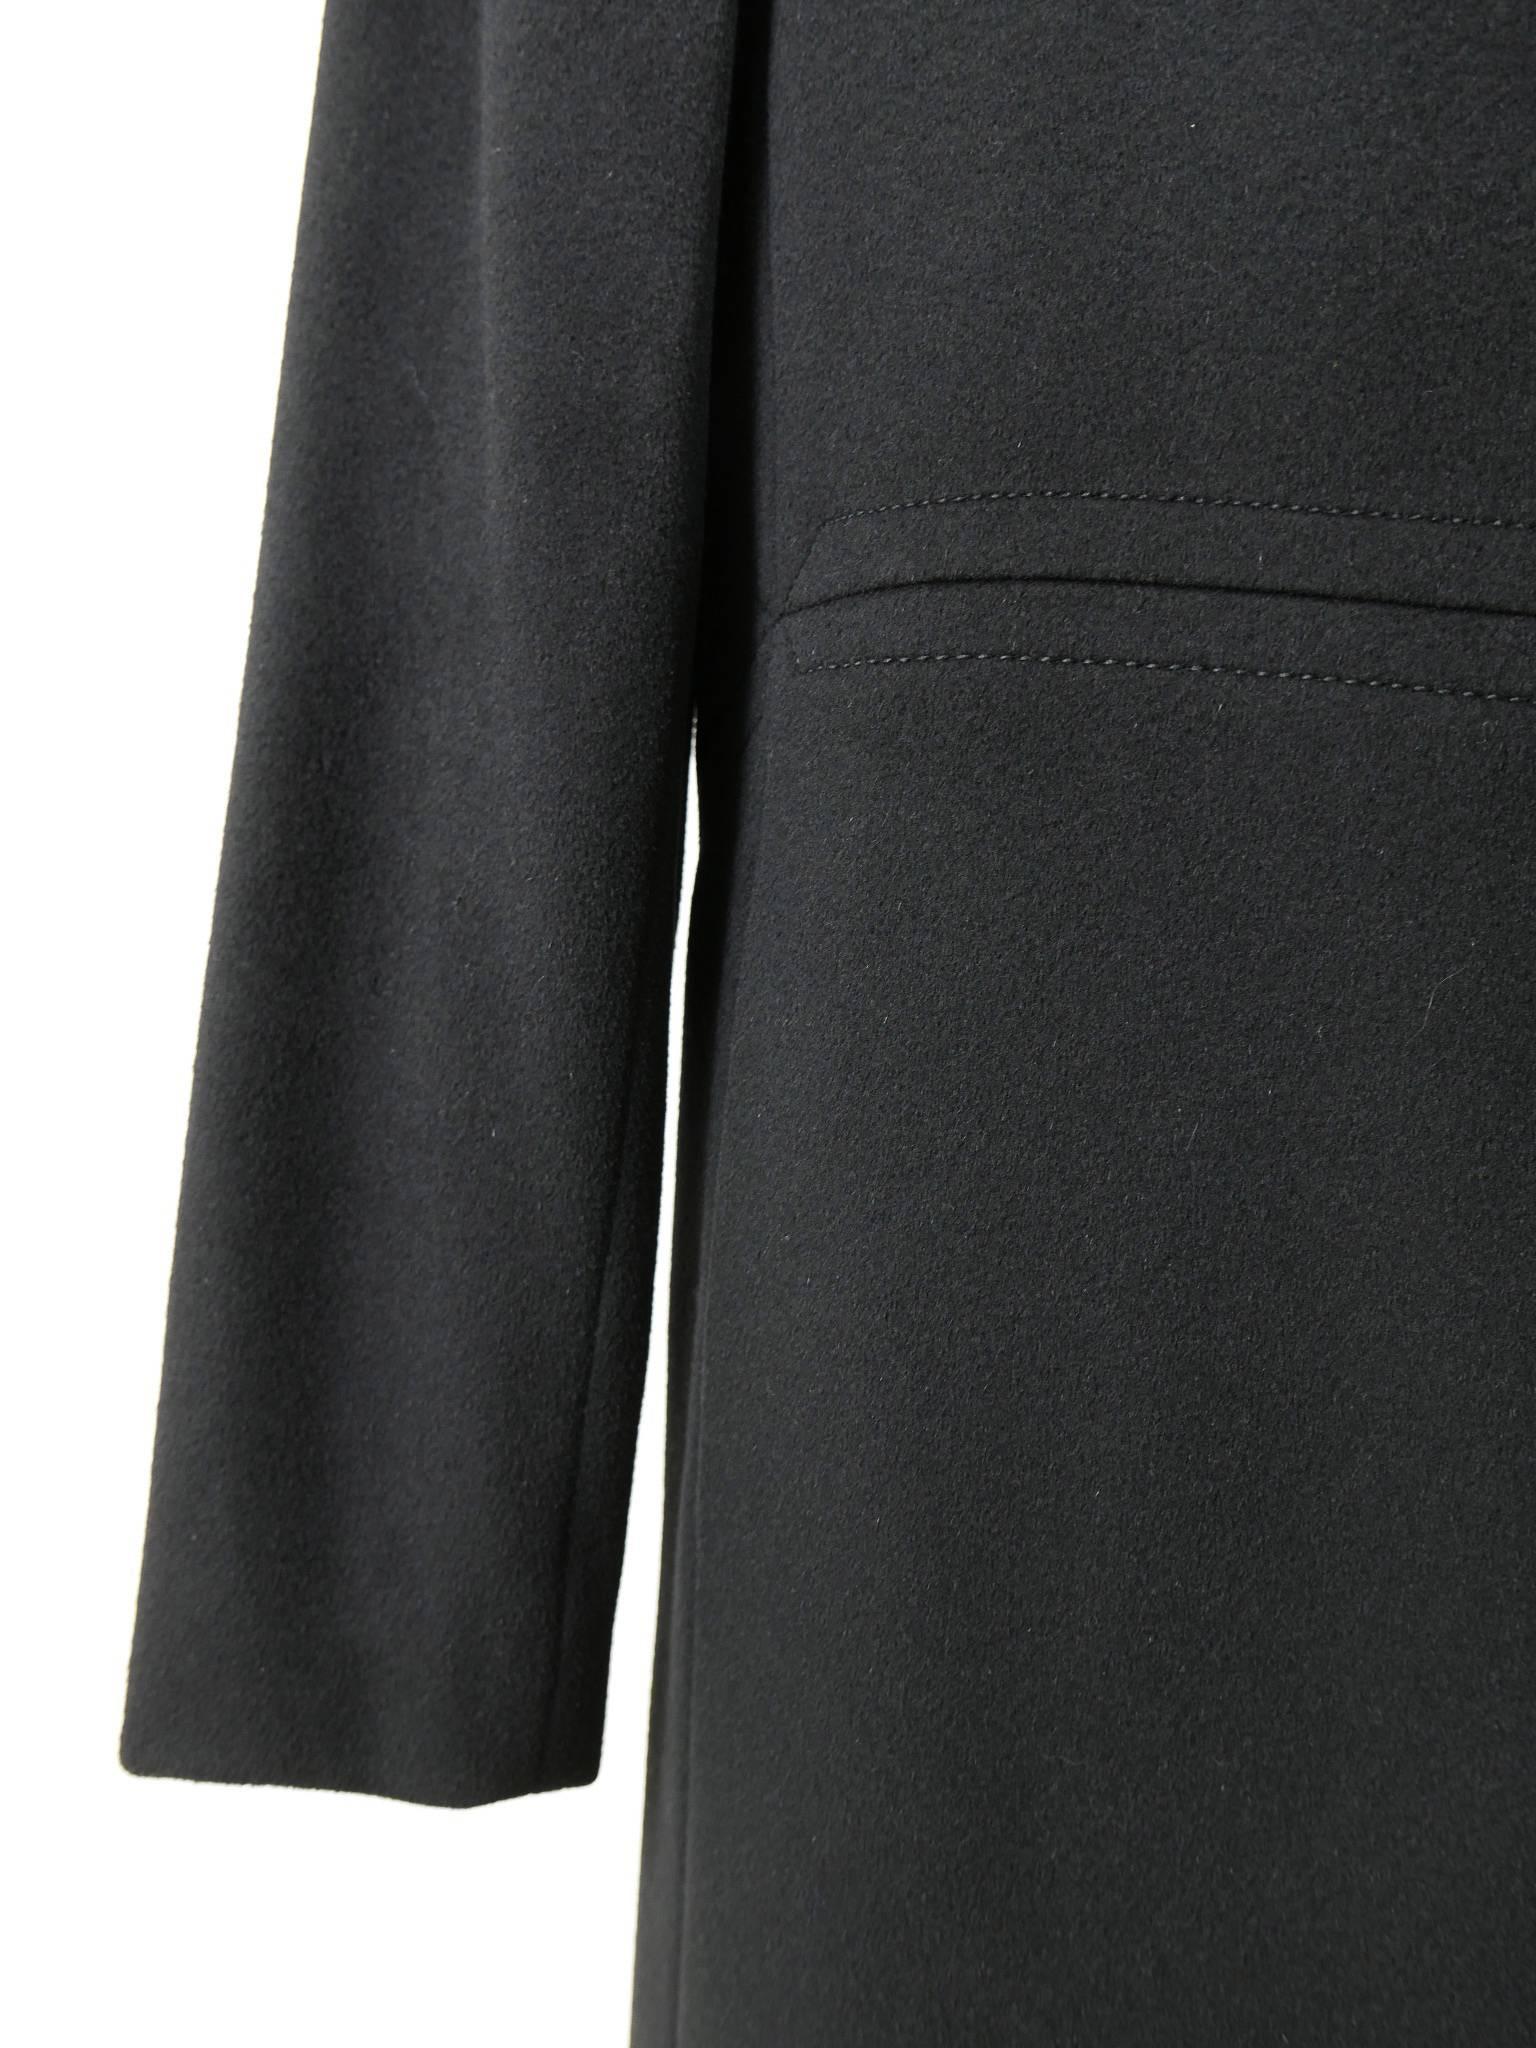 Gucci Made in Italy Black Wool Coat 4